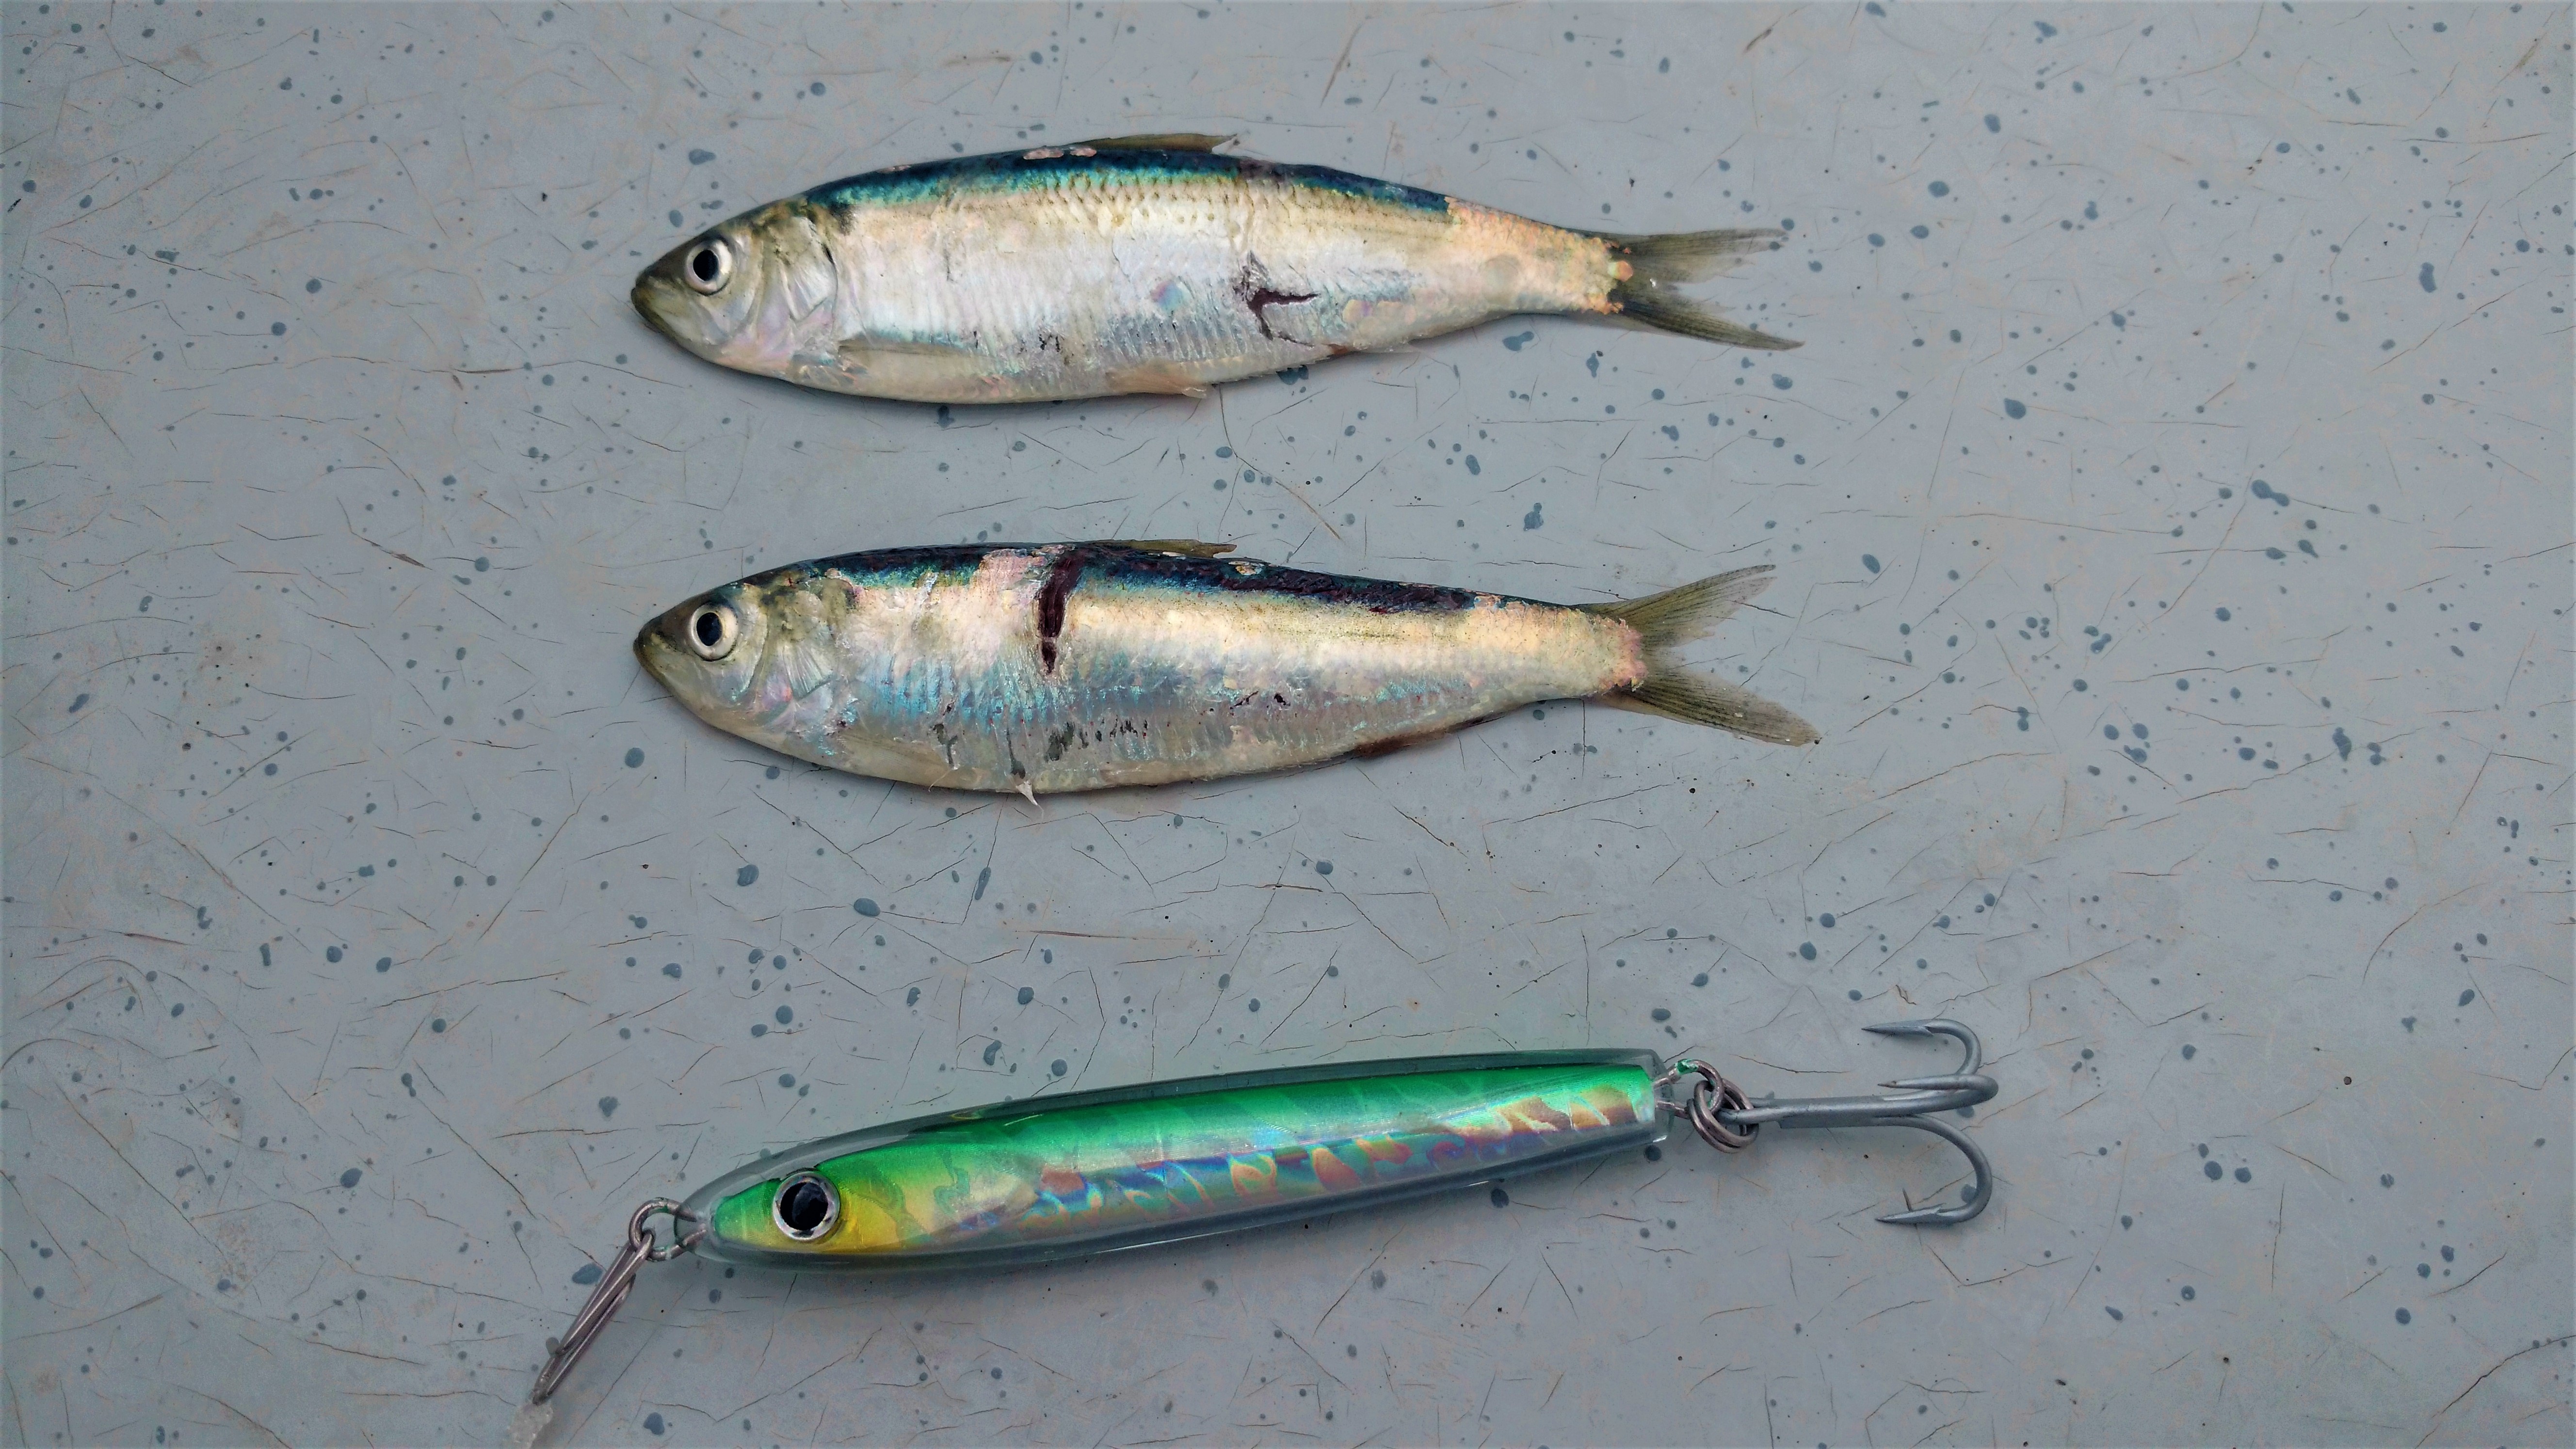 FISHING WITH ANCHOVIES - HOW TO FISH THE SILVERSIDE